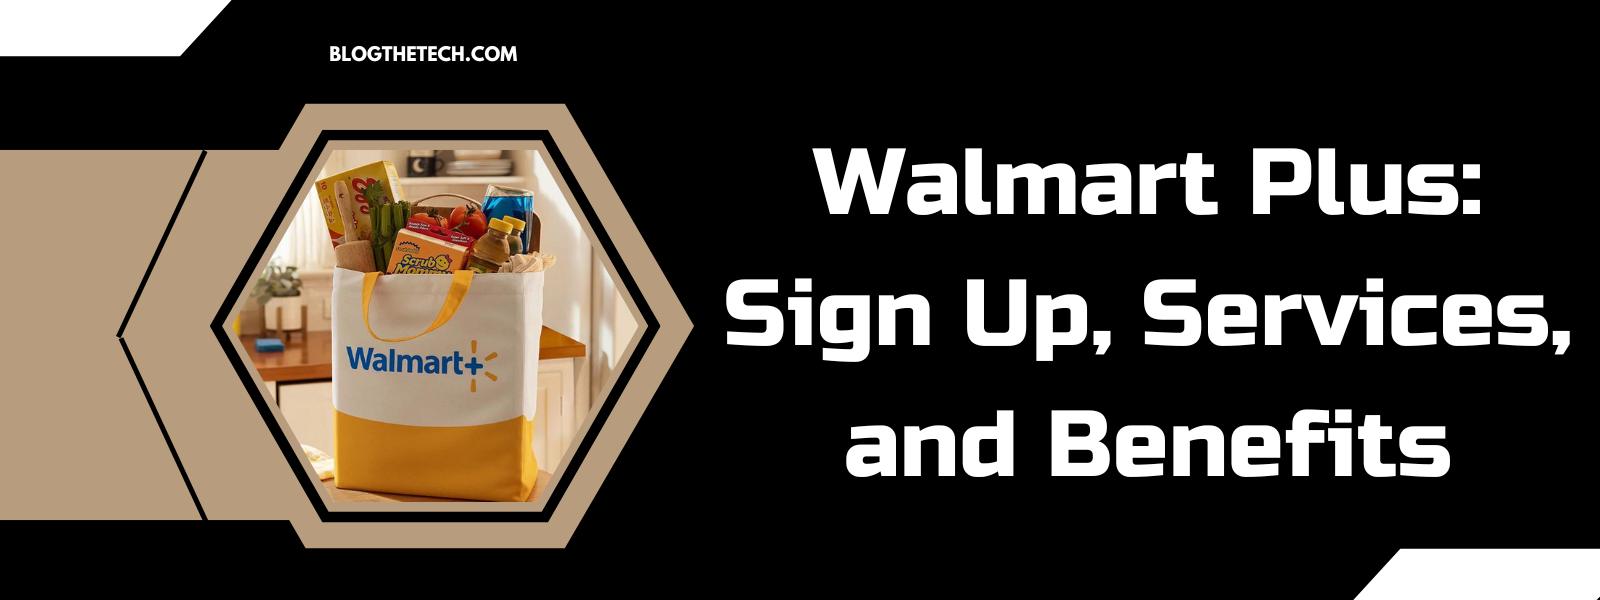 Walmart-Plus-Sign-Up-Services-Benefits-featured